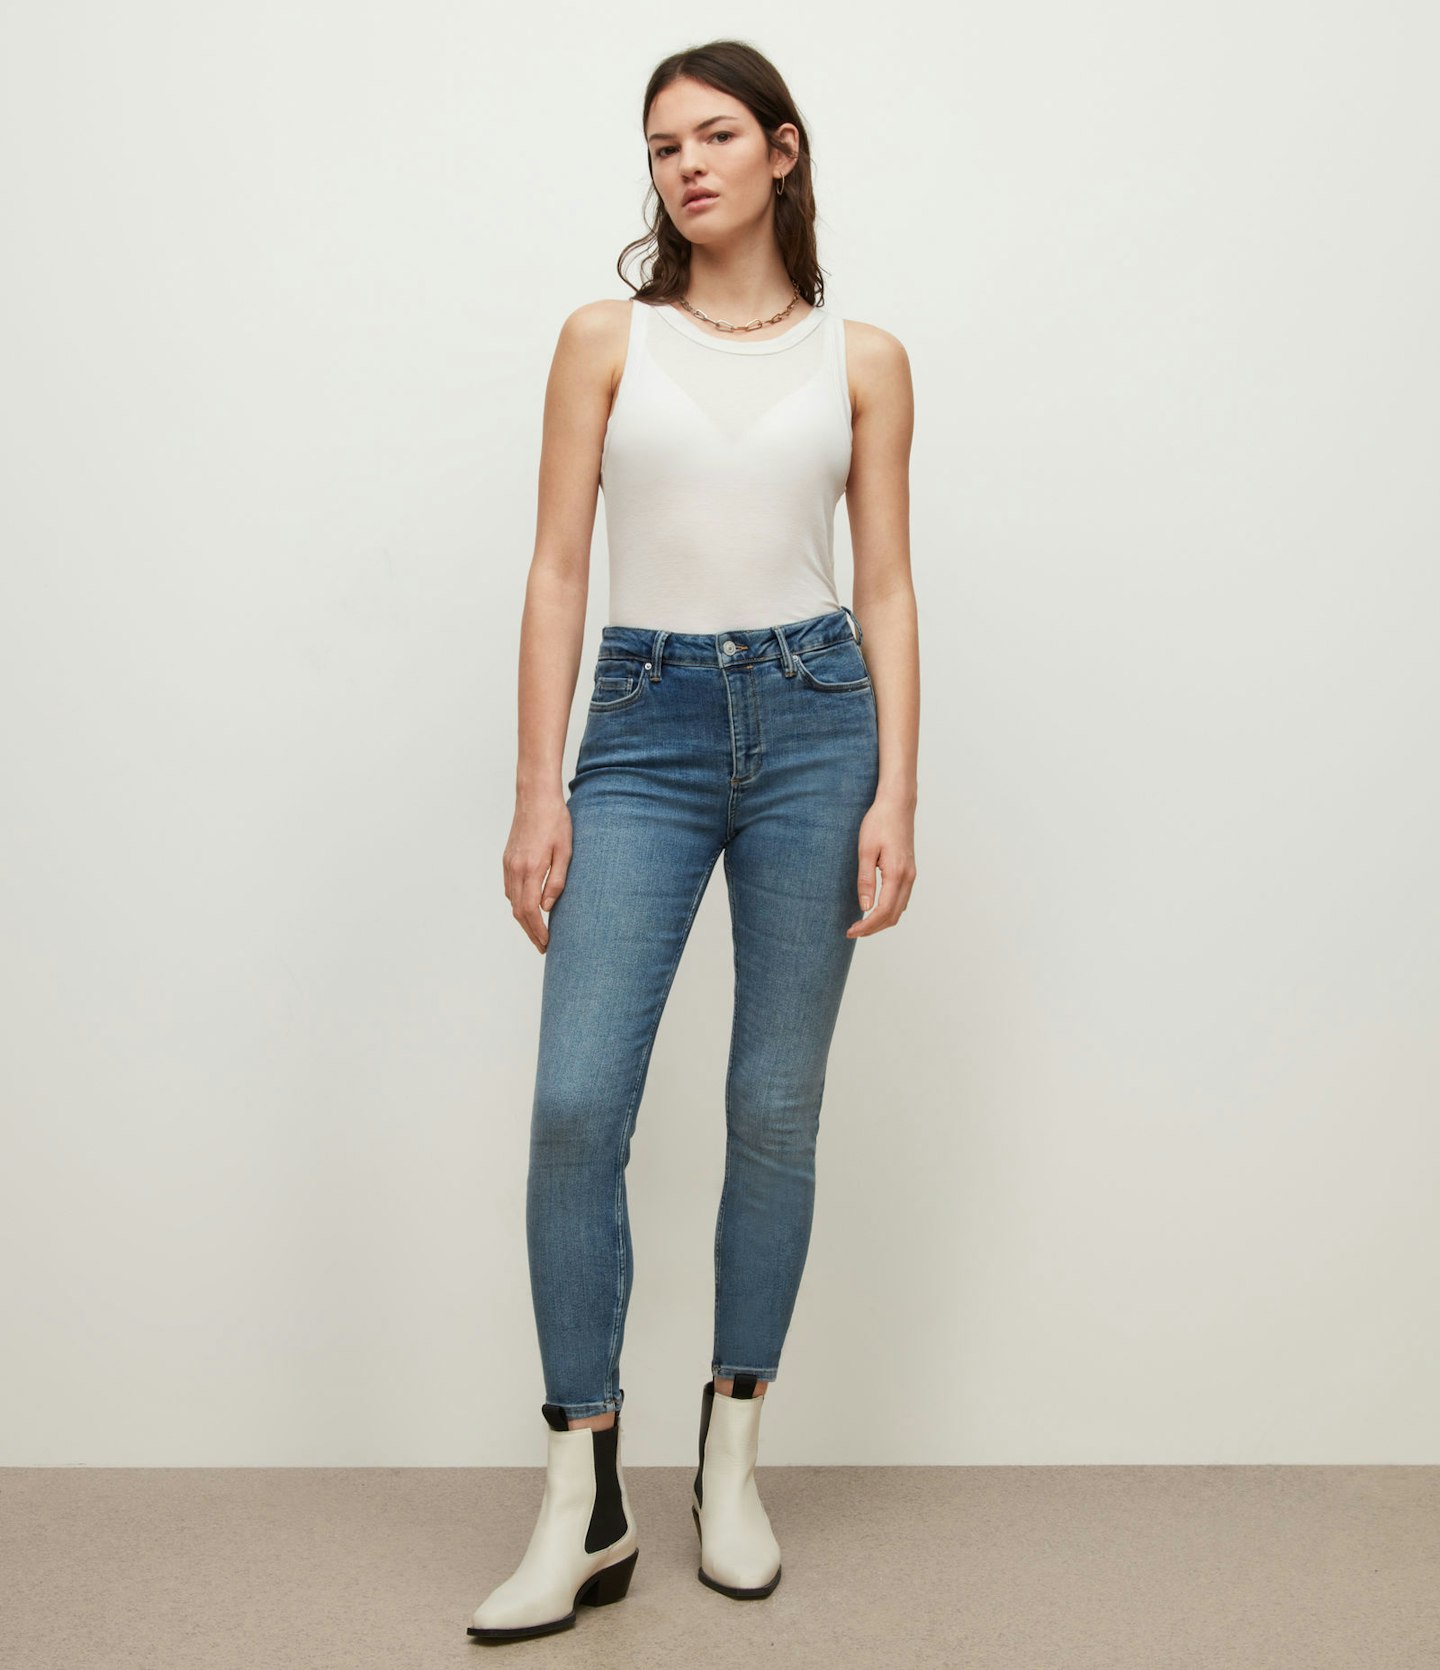 All Saints, Dax High-Rise Size Me Skinny Jeans, £99